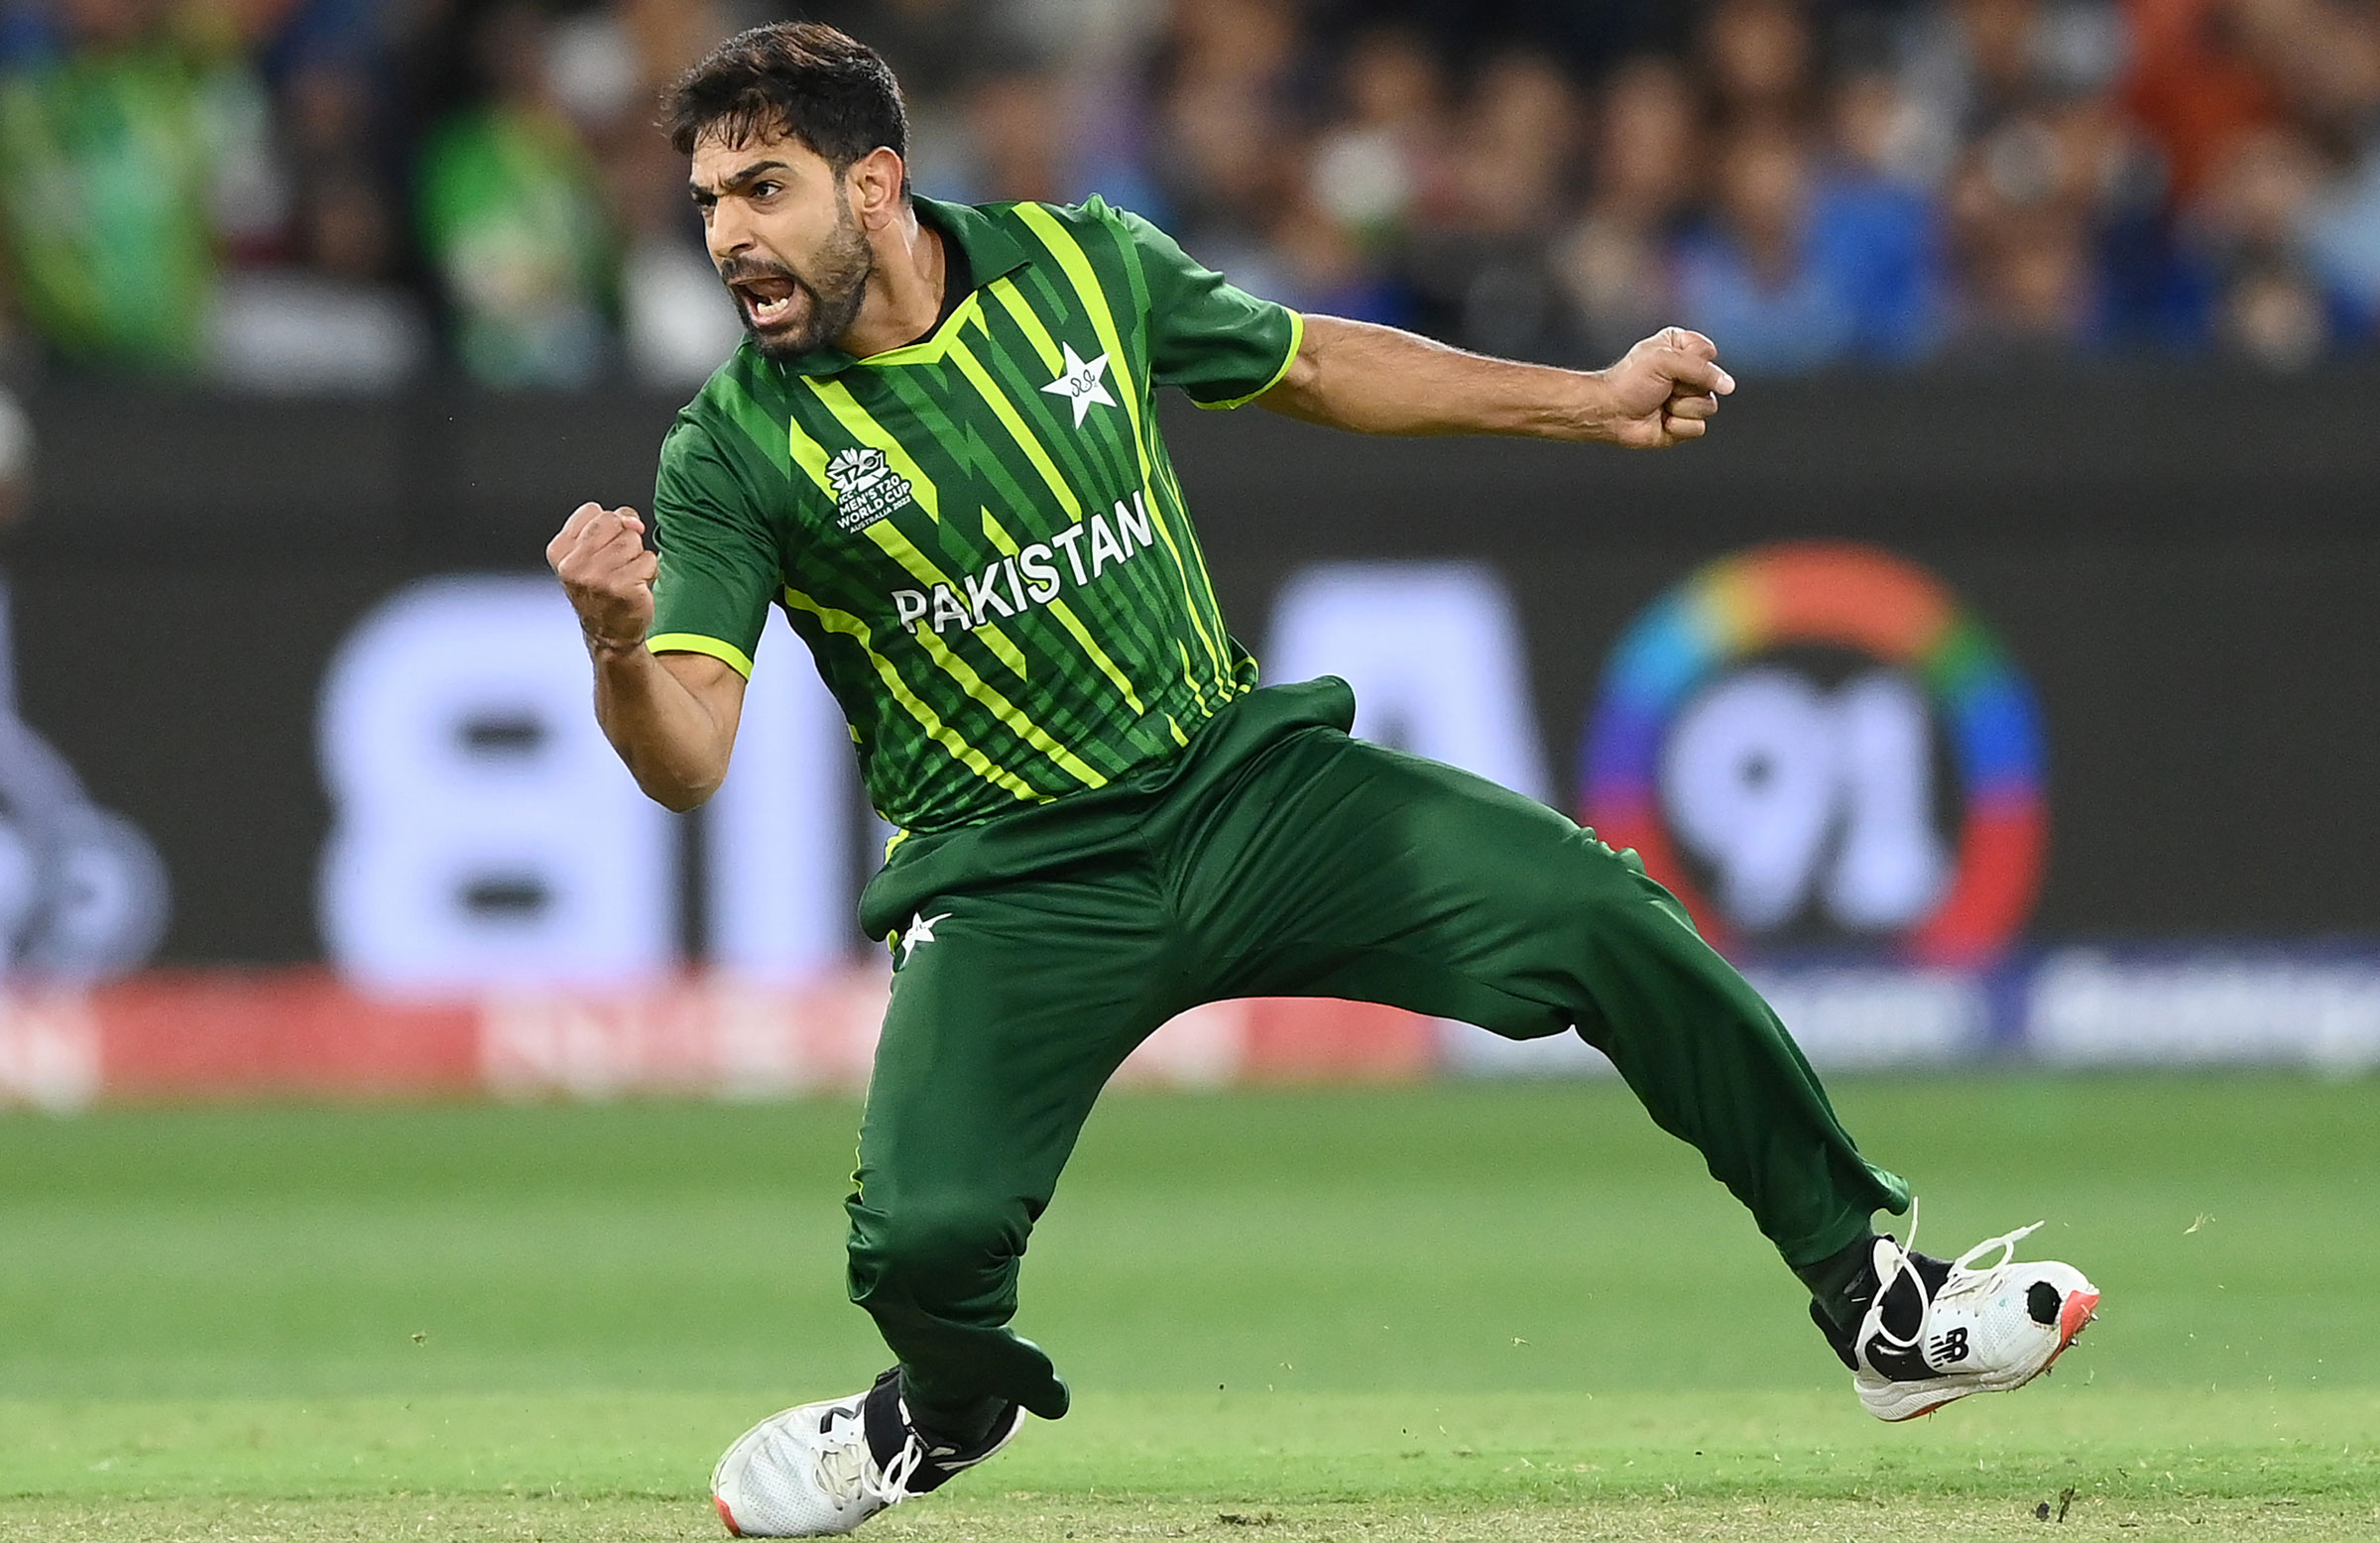 Haris Rauf, Mohammad Rizwan named in ICCs T20 Team of the Year